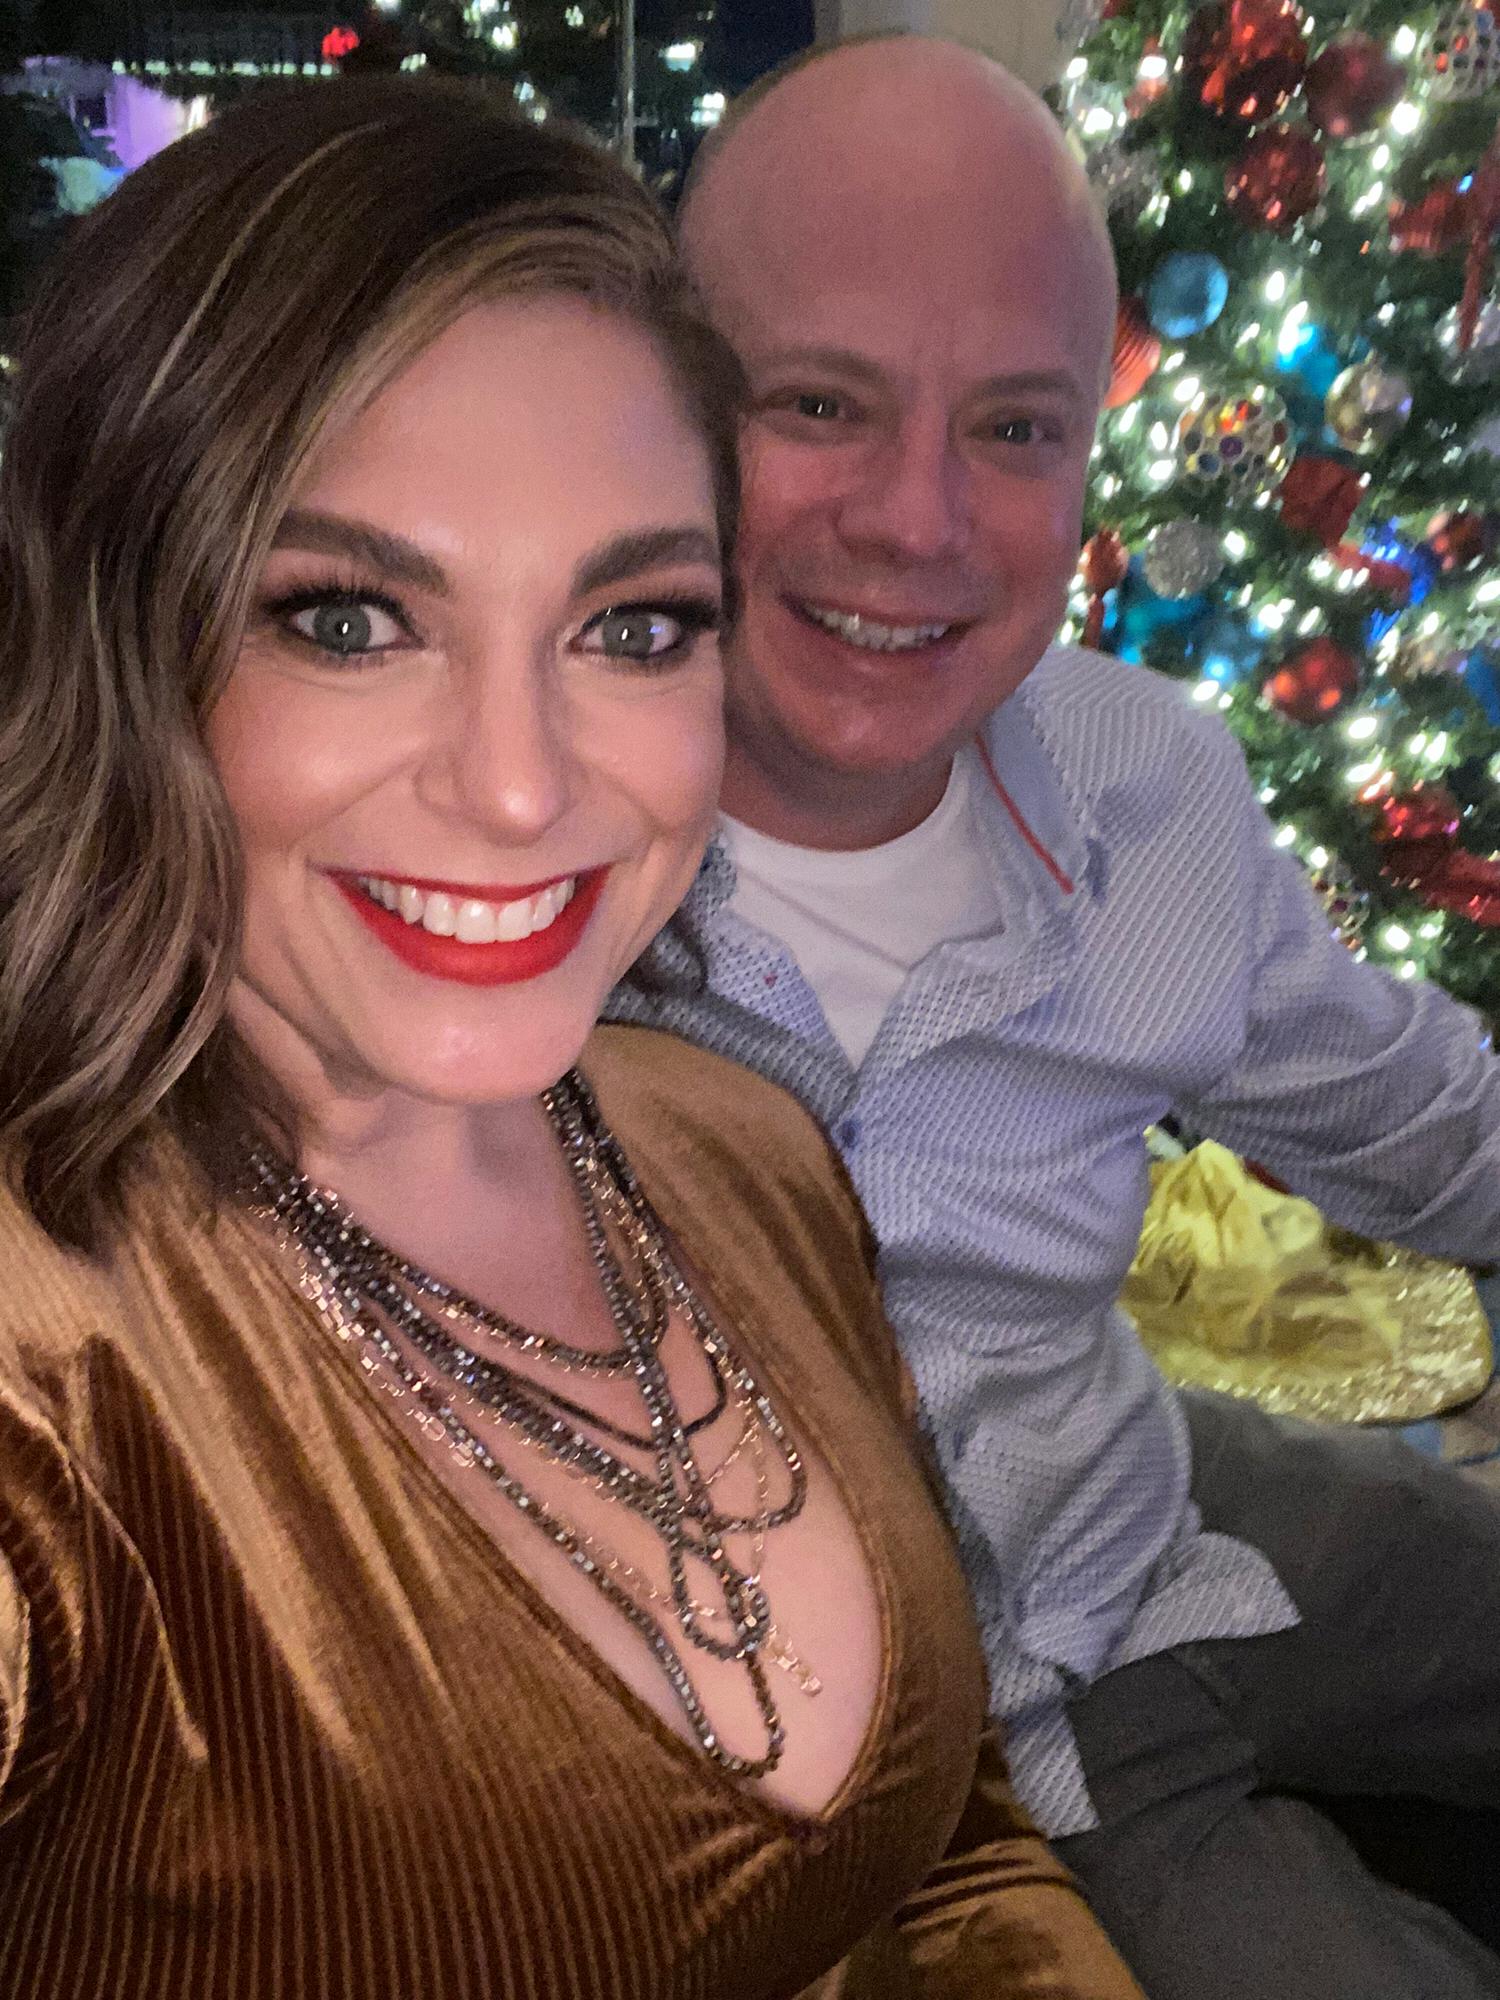 Christmas Eve 2020 - We'd just gotten engaged that morning!